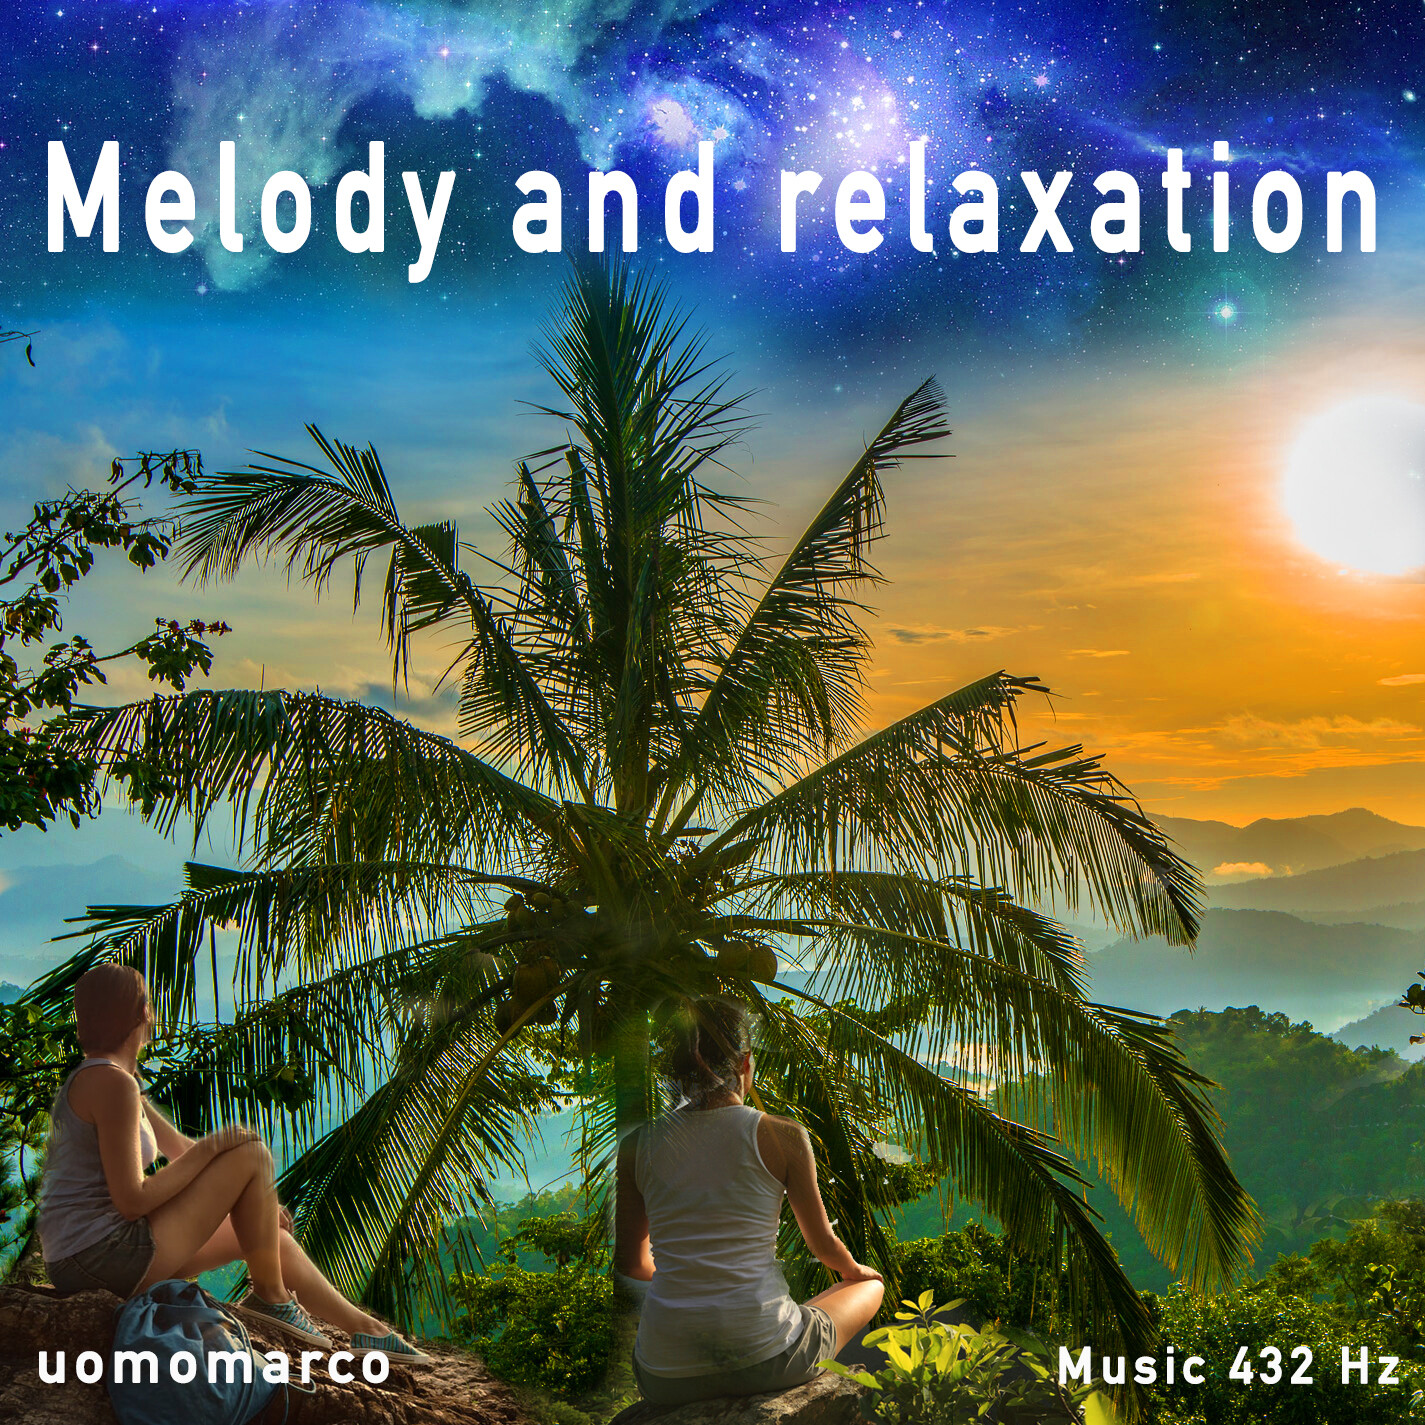 Melody and relaxation